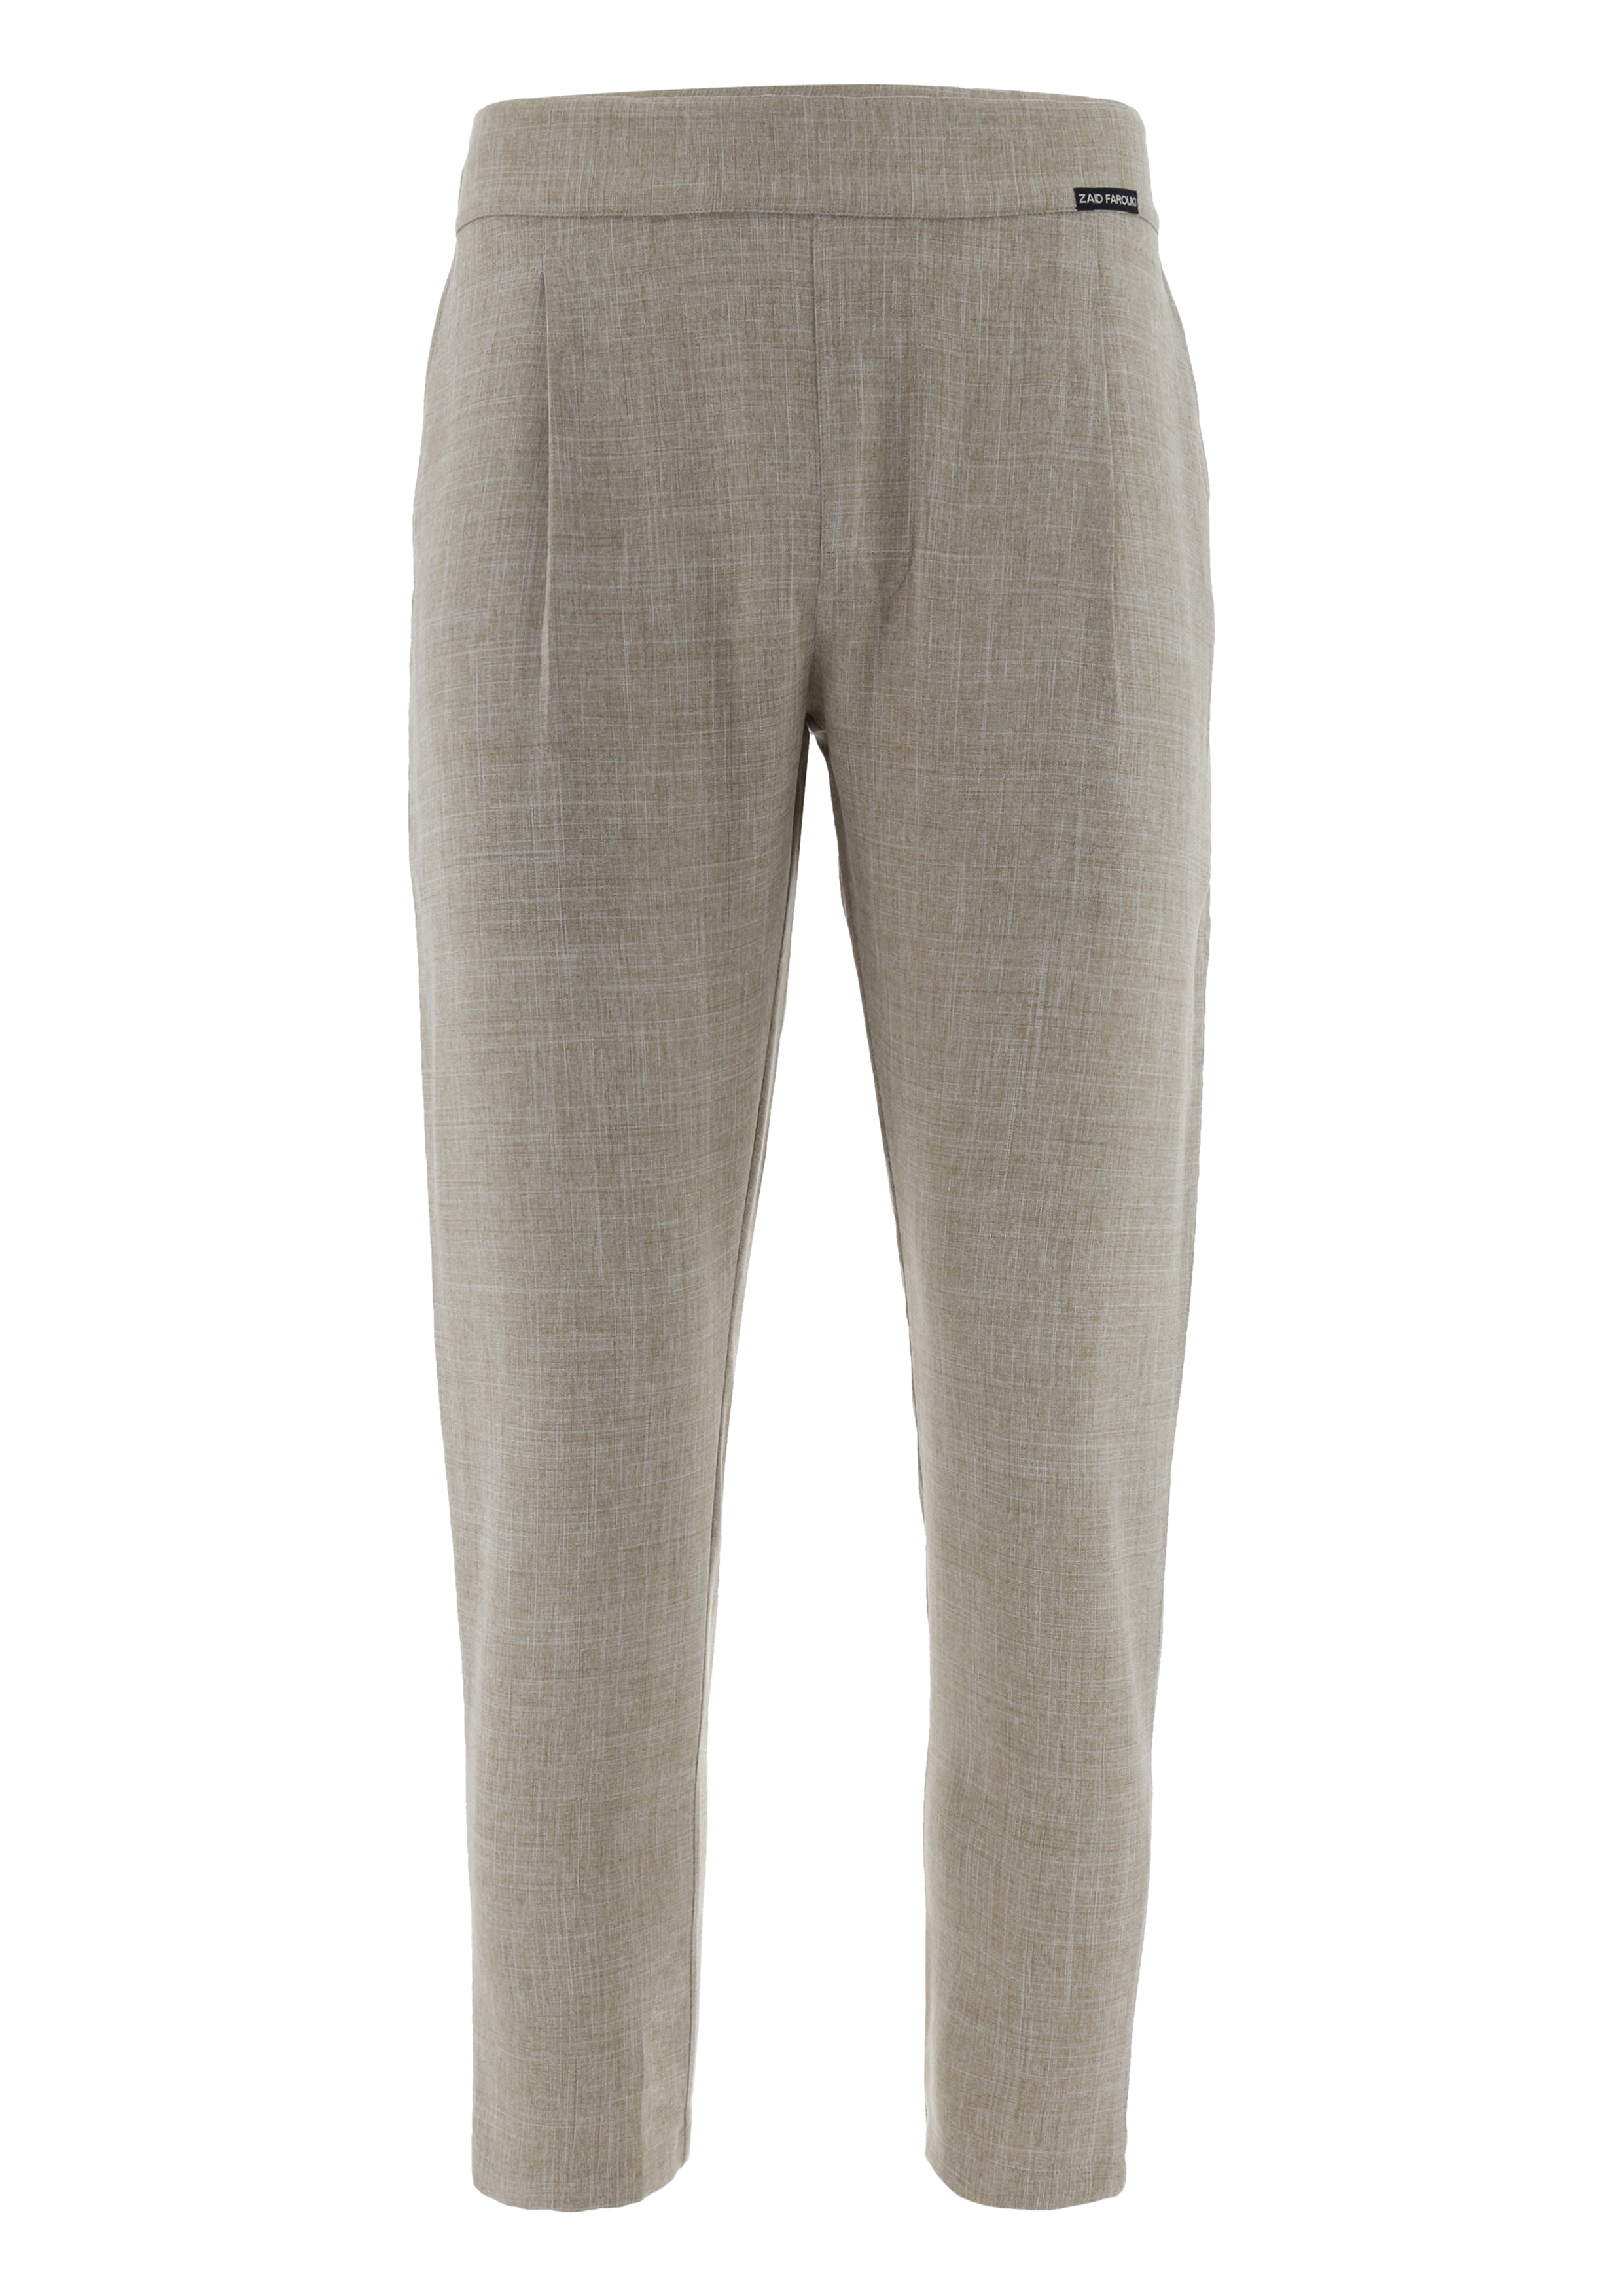 Green Beige Linden Tailored Trousers